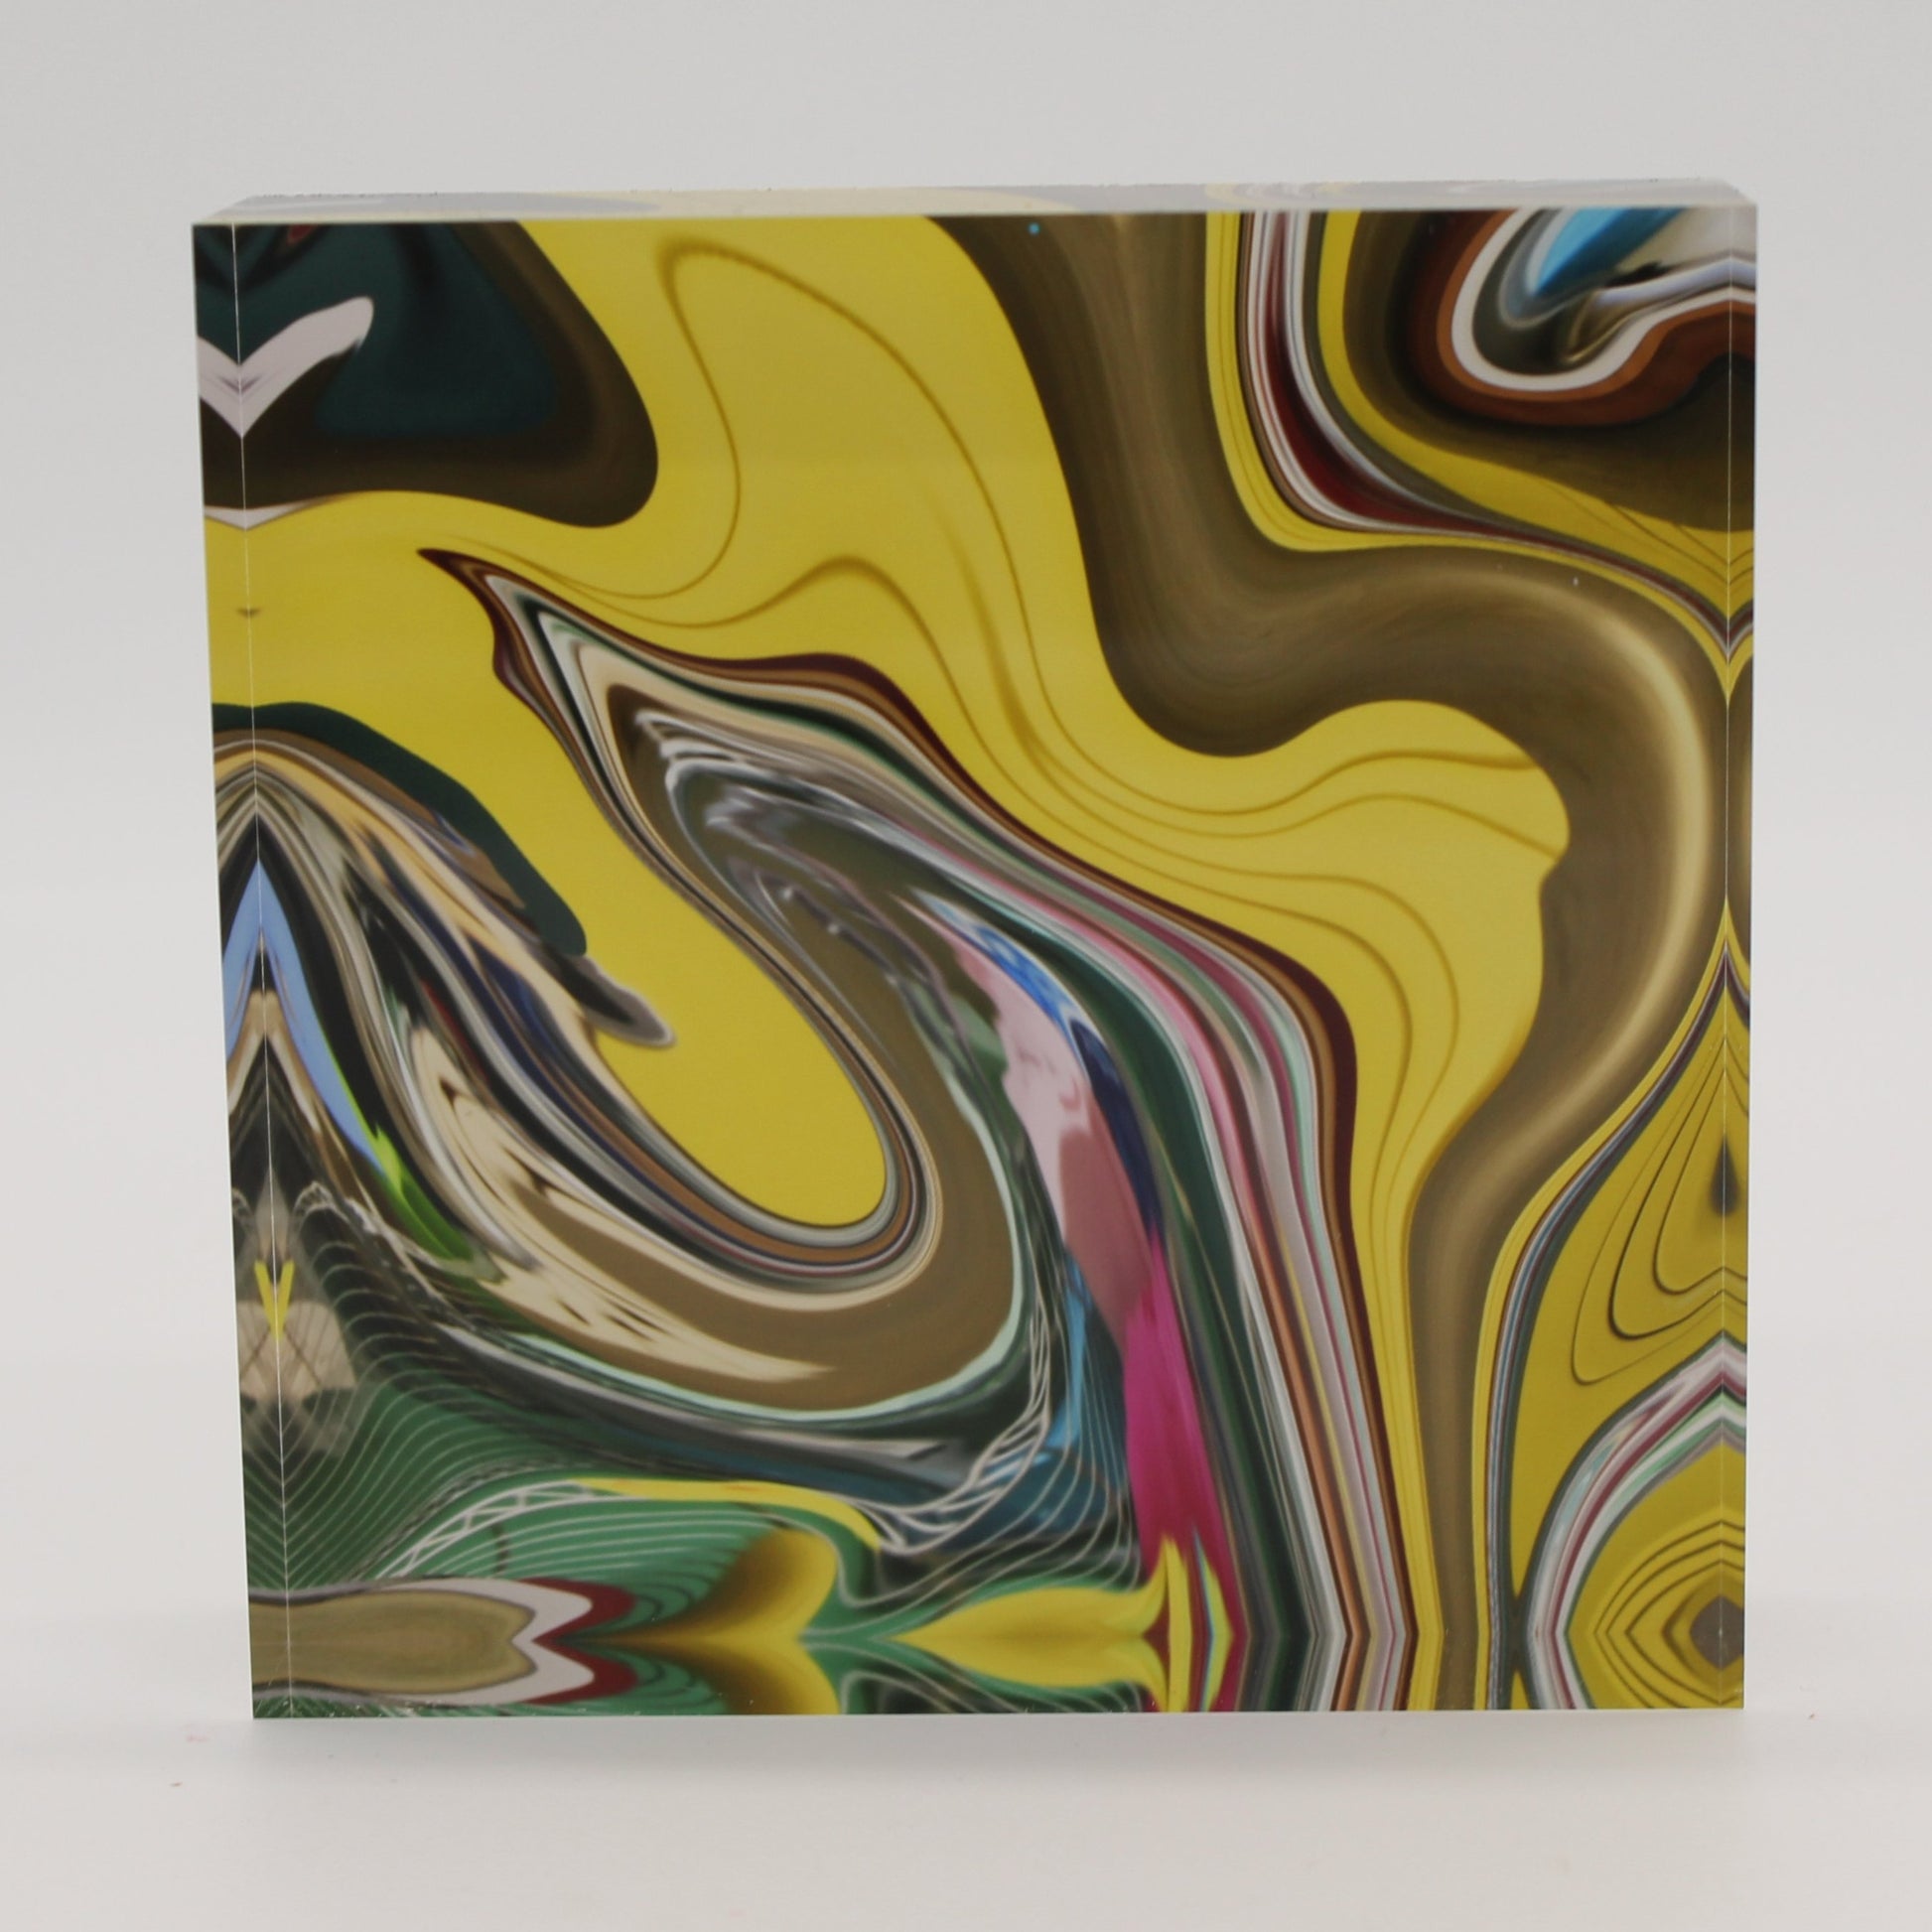 Acrylic block with swirling design of yellow, gold, green, pink swirl